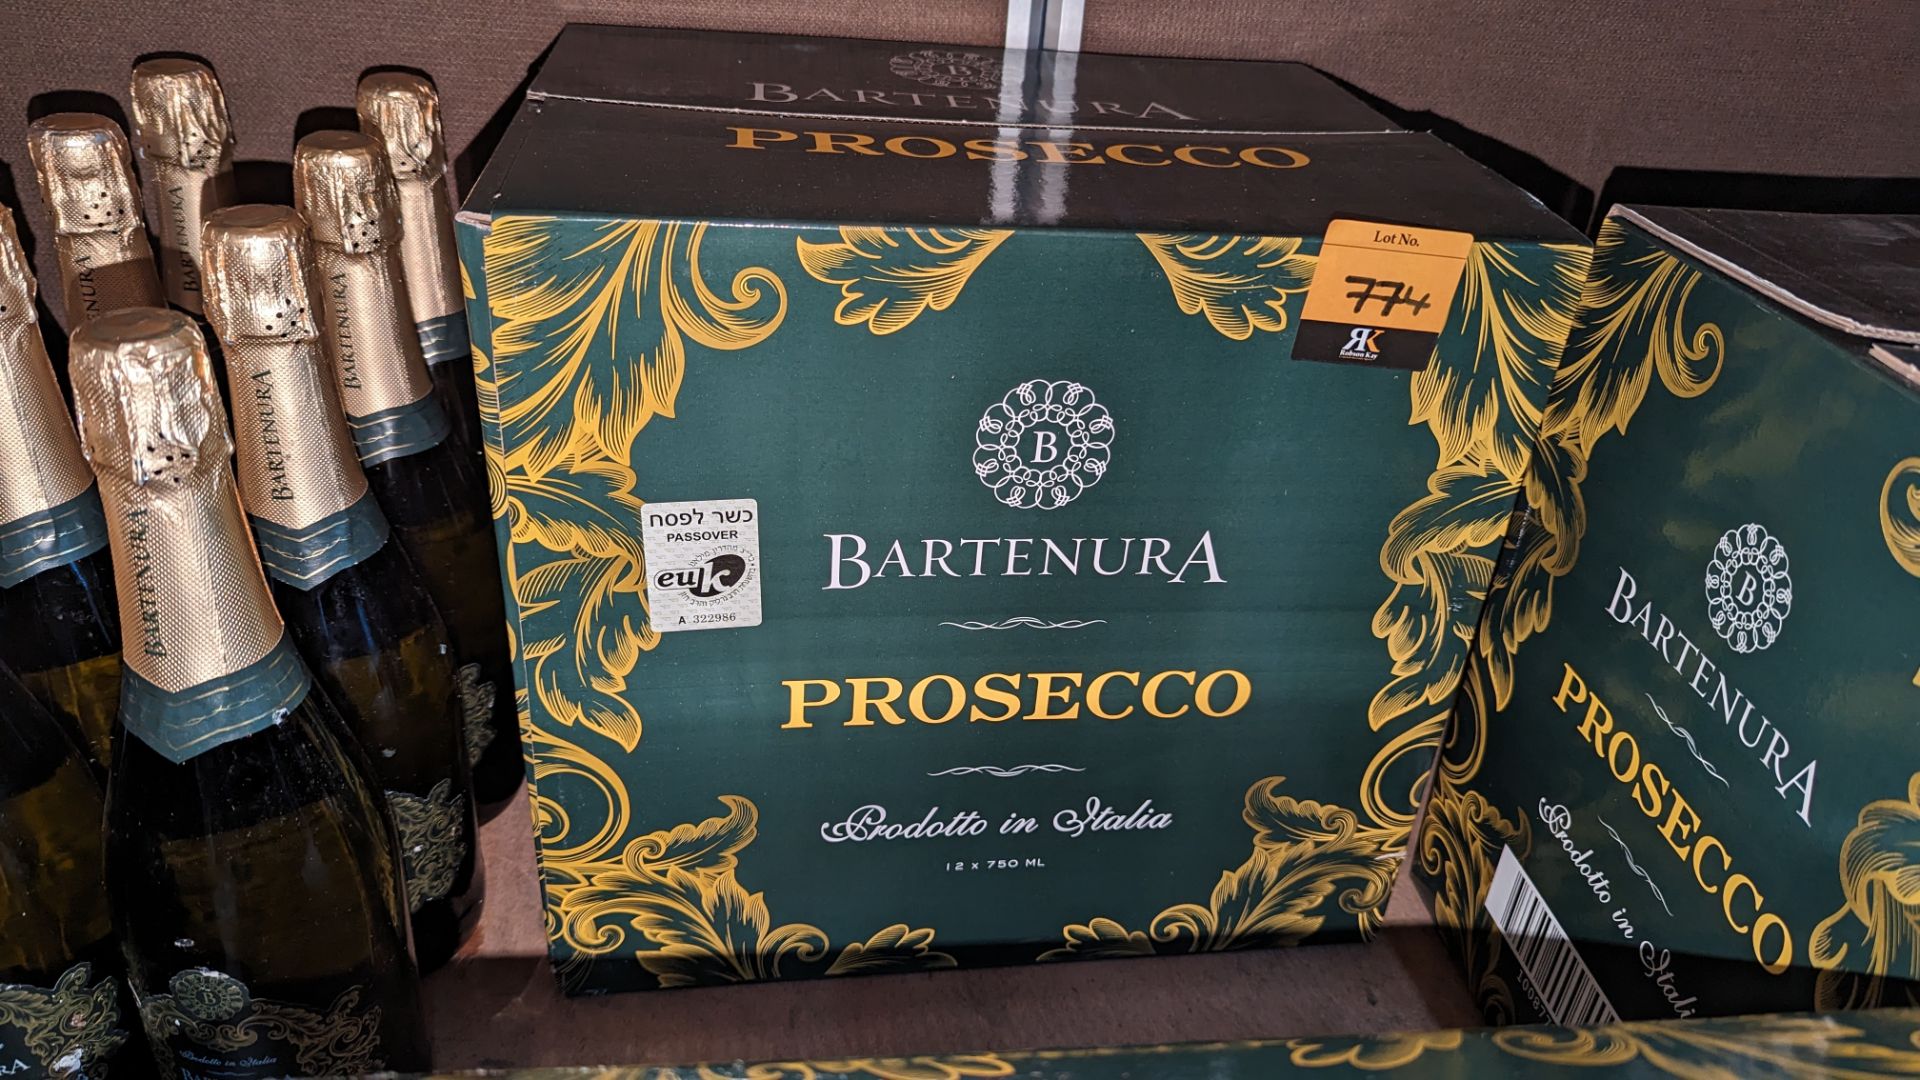 12 bottles of Bartenura Brut Prosecco Italian white sparkling wine sold under AWRS number XQAW000001 - Image 2 of 3